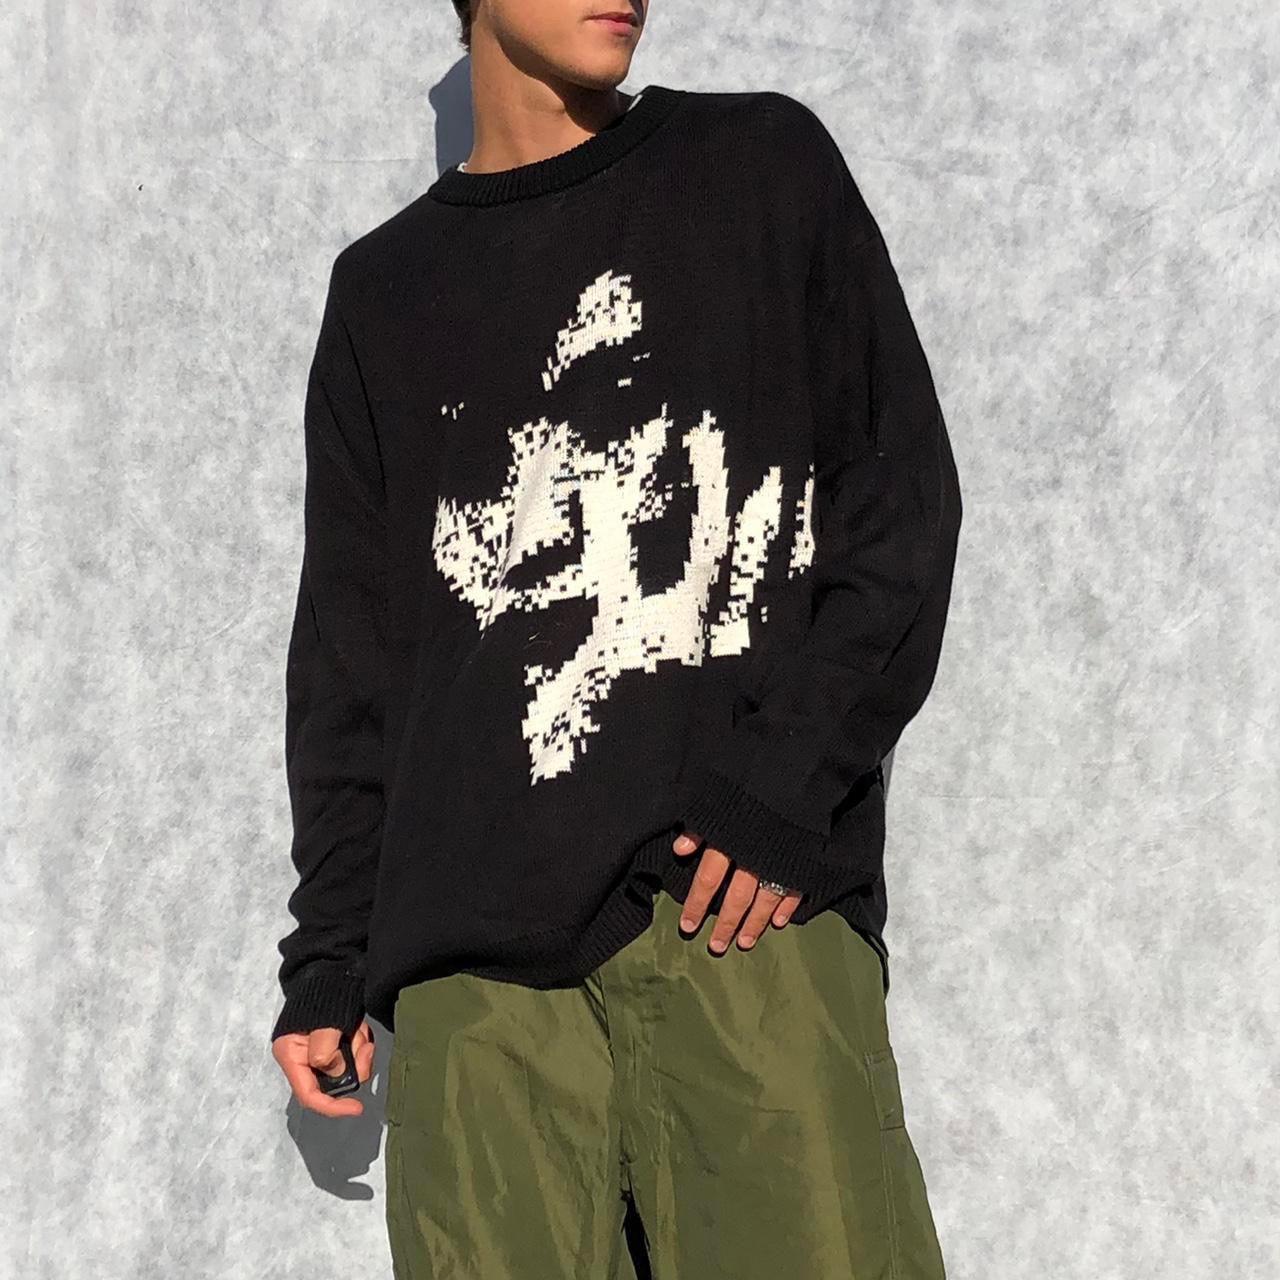 Knit Graphic Sweatshirt by Endorphin1992 - Known Source